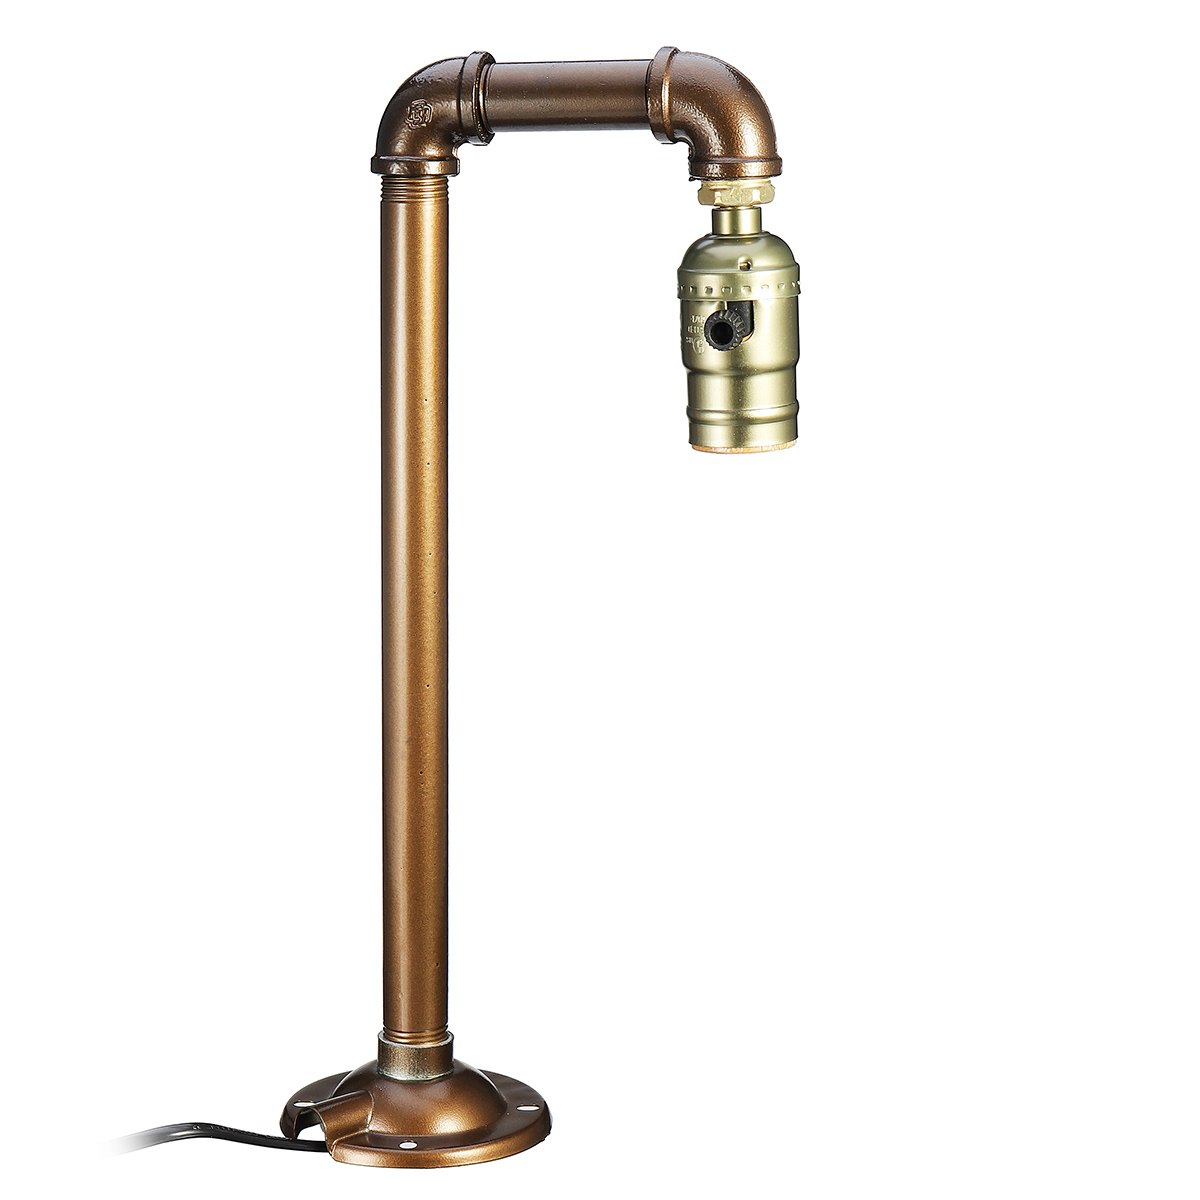 Industrial-Water-Pipe-E27-Bulb-Lamp-Light-Desk-Table-Lamp-Home-Bedroom-Fixture-Decor-1432211-6